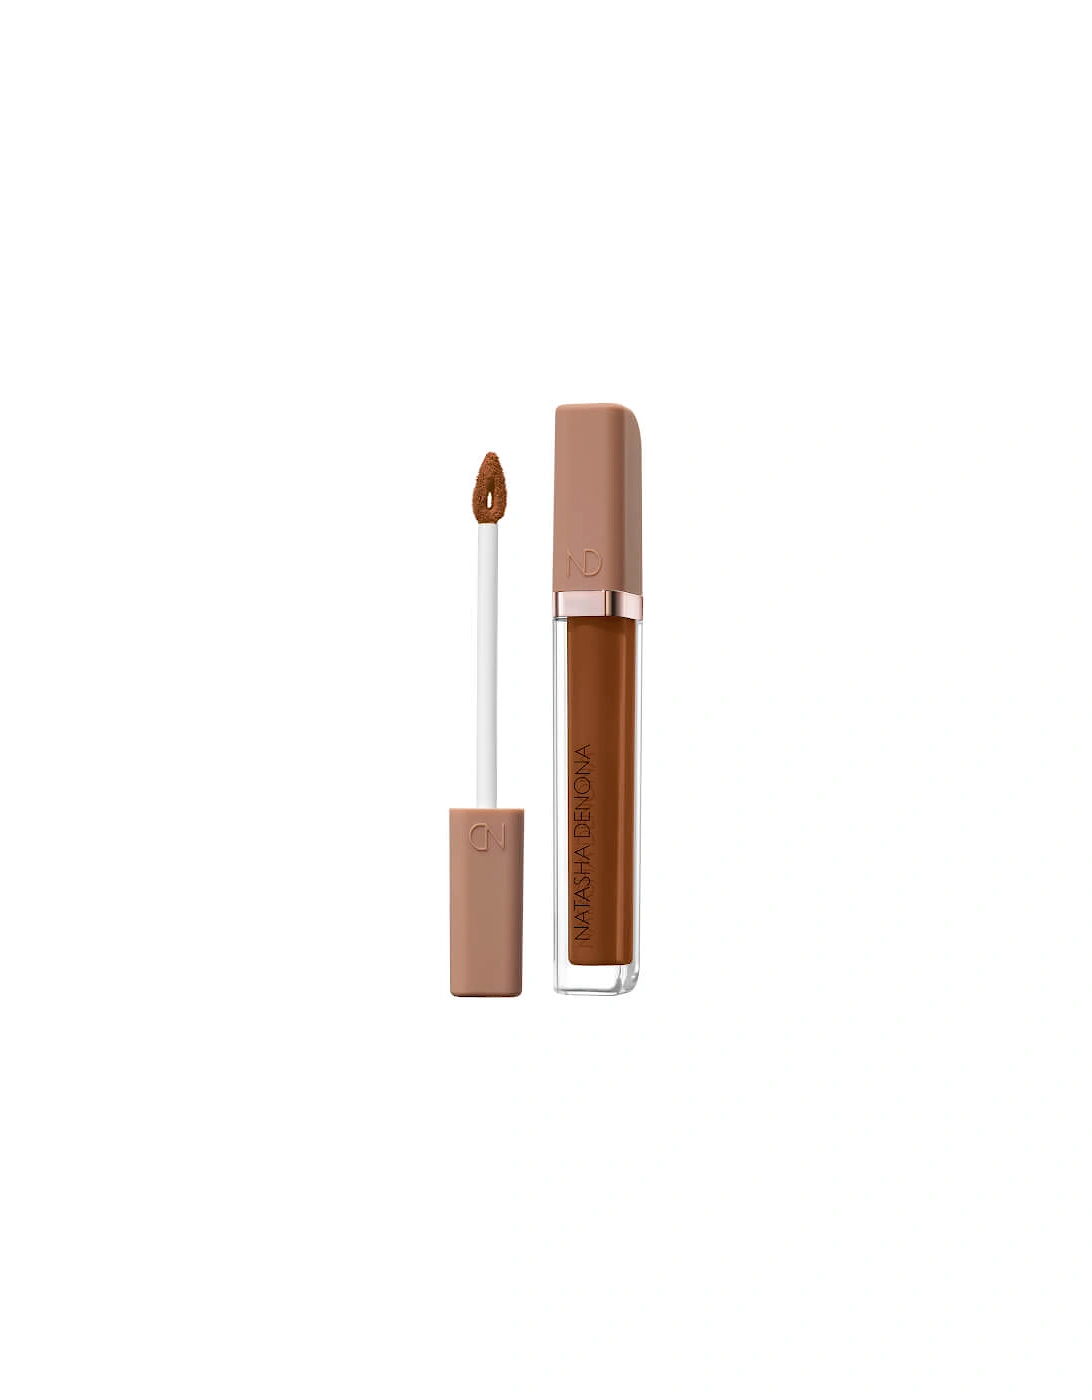 Hy-Glam Concealer - P10, 2 of 1